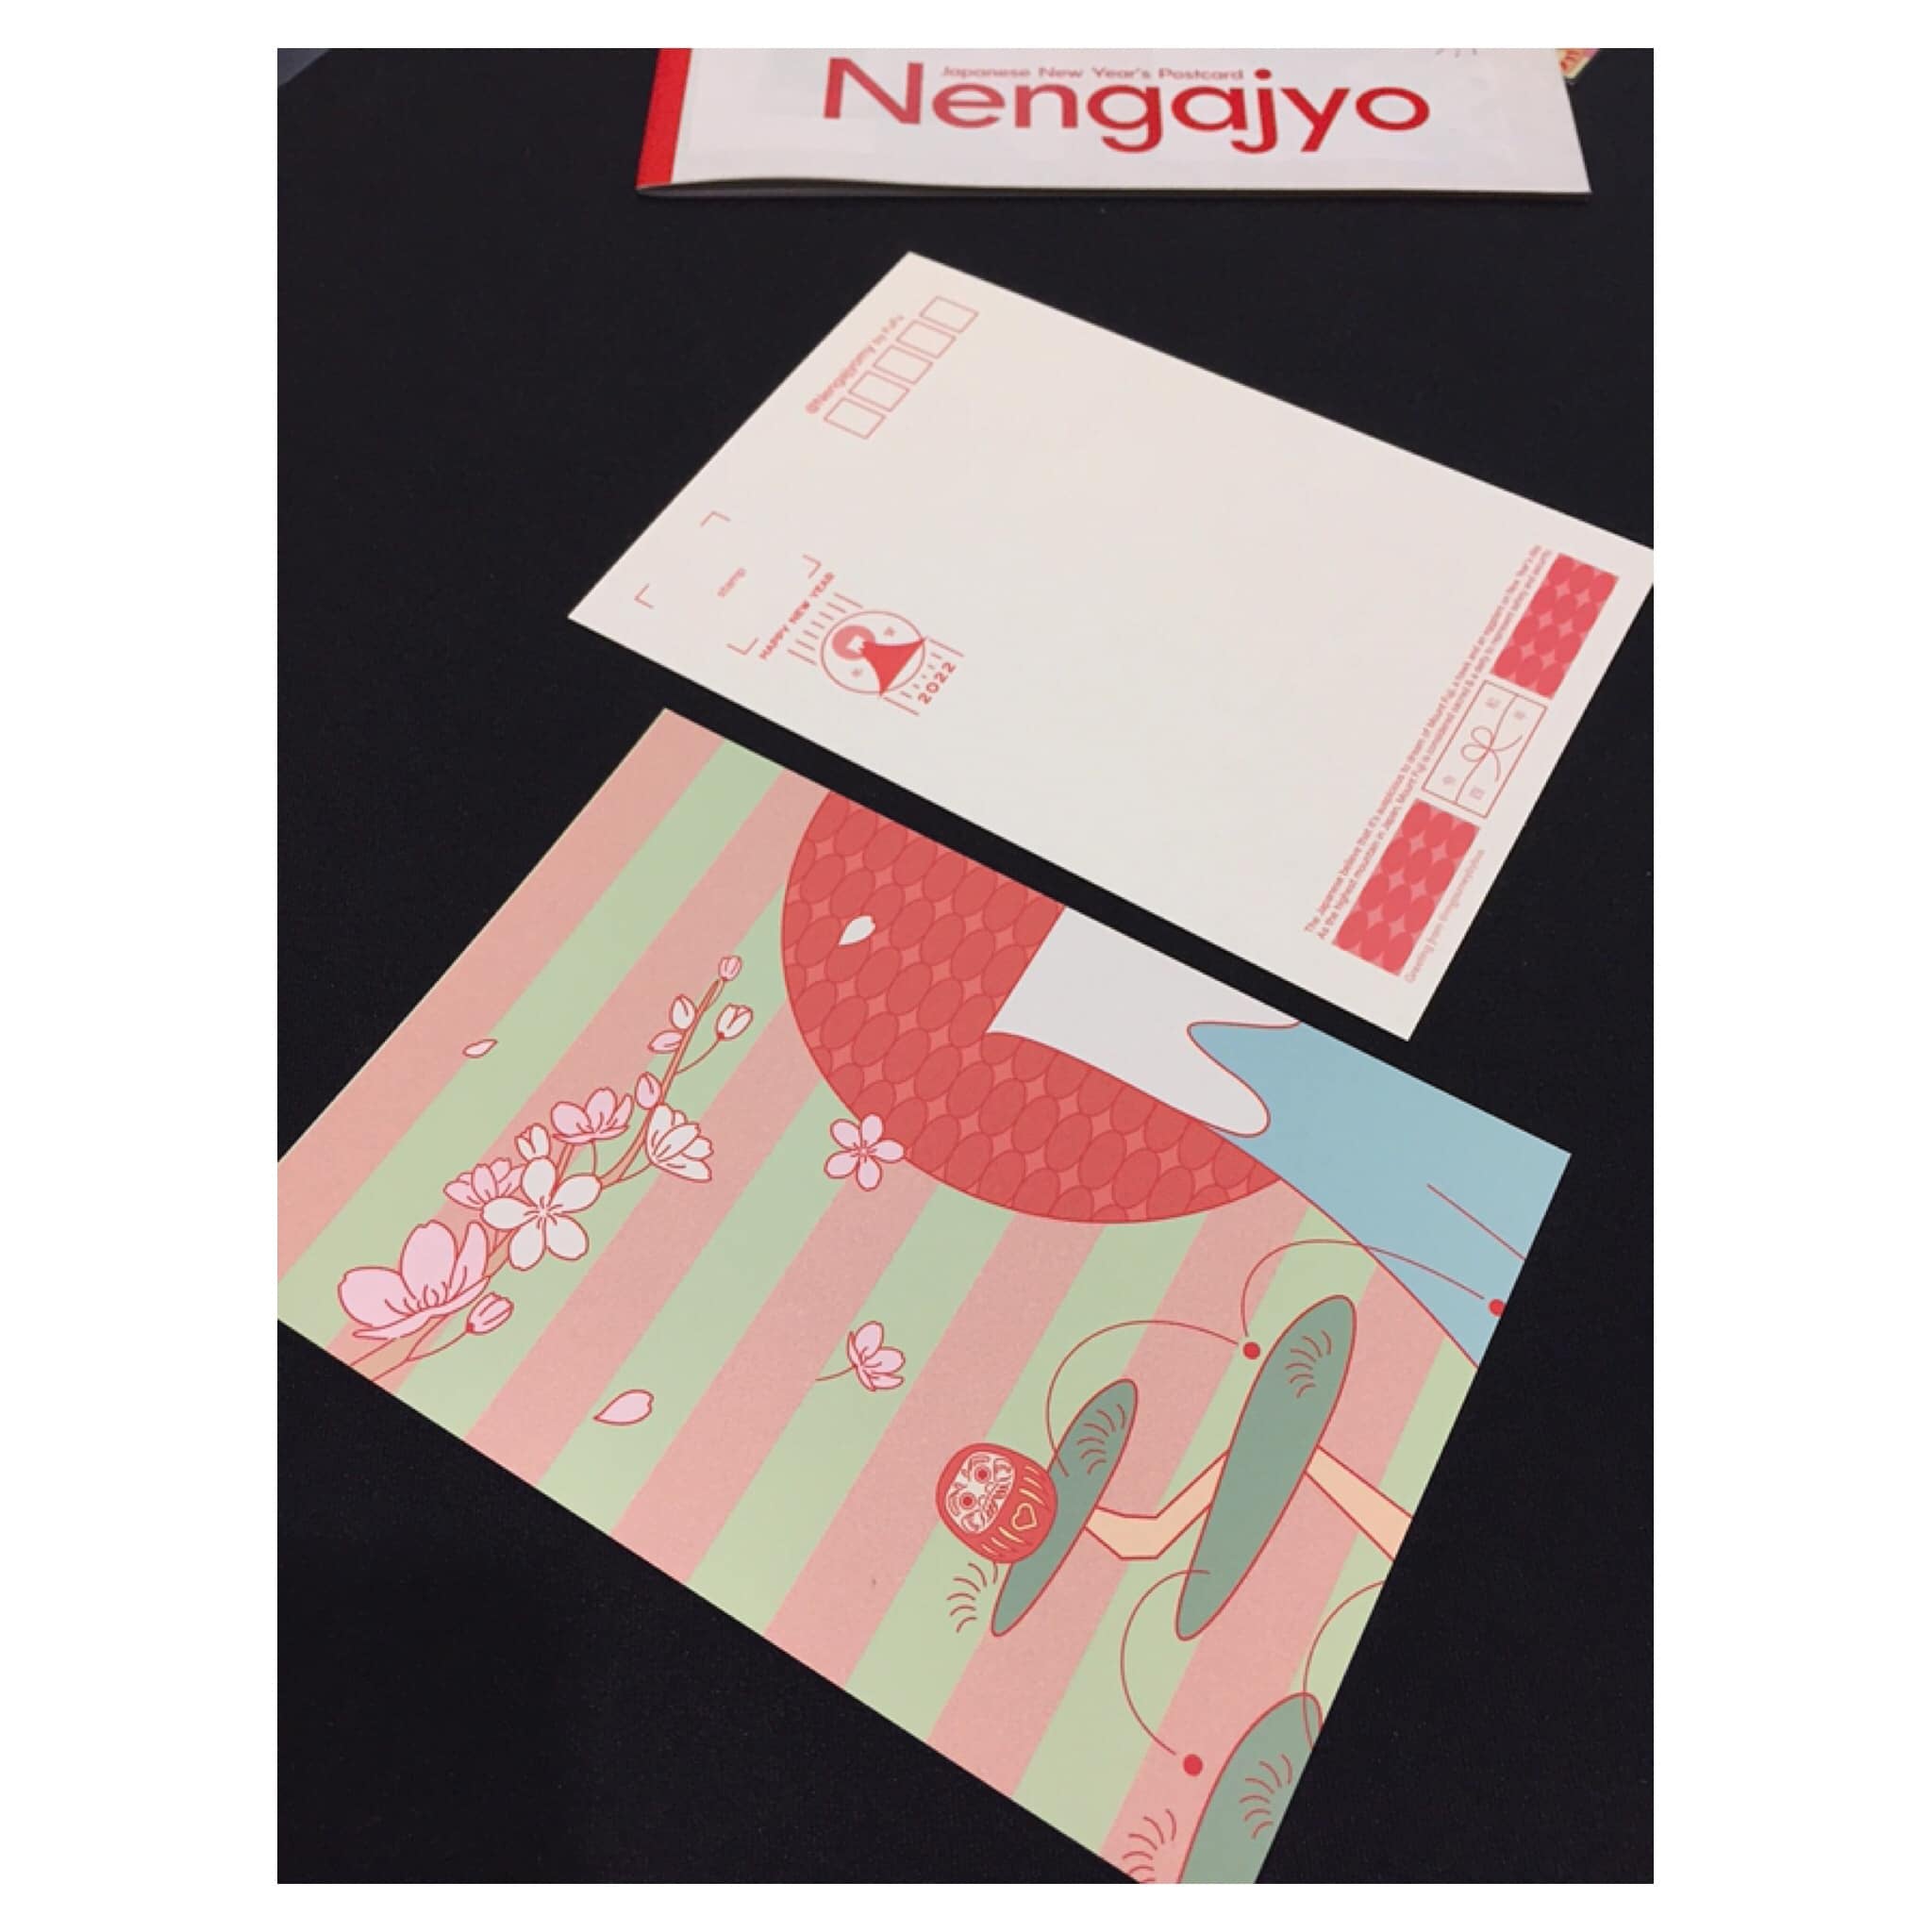 My Journey By Bus:  Japanese New Year's Postcards